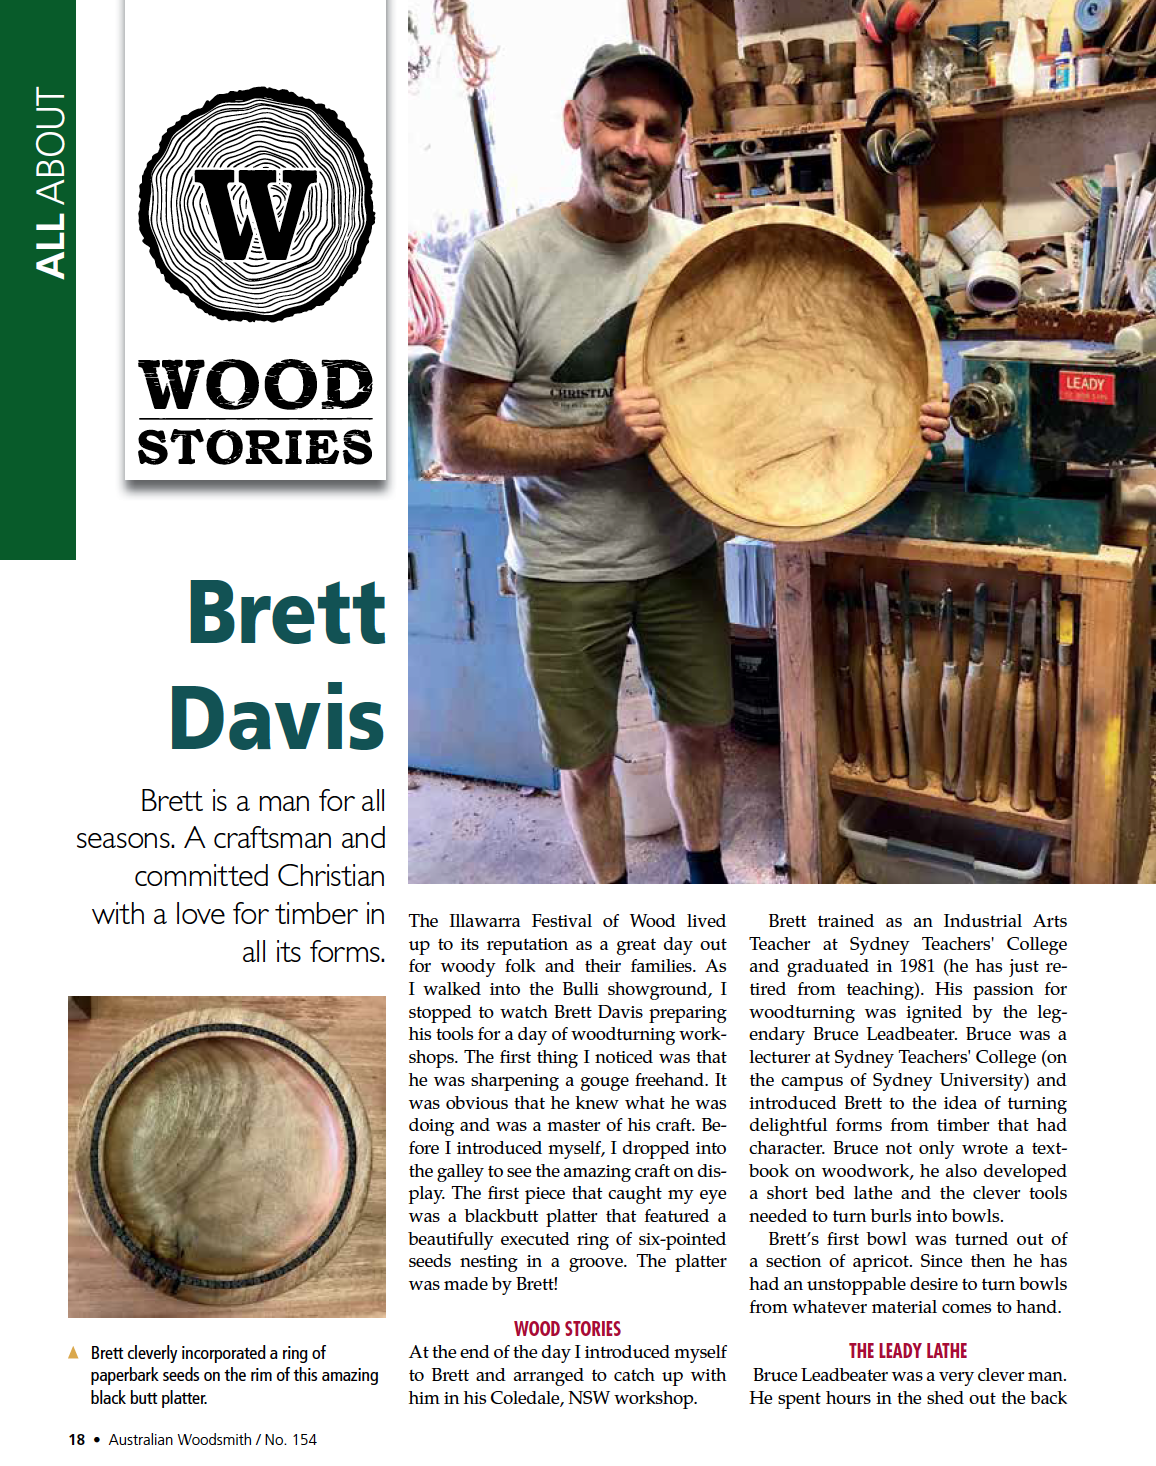 woodsmith magazine bd article.png